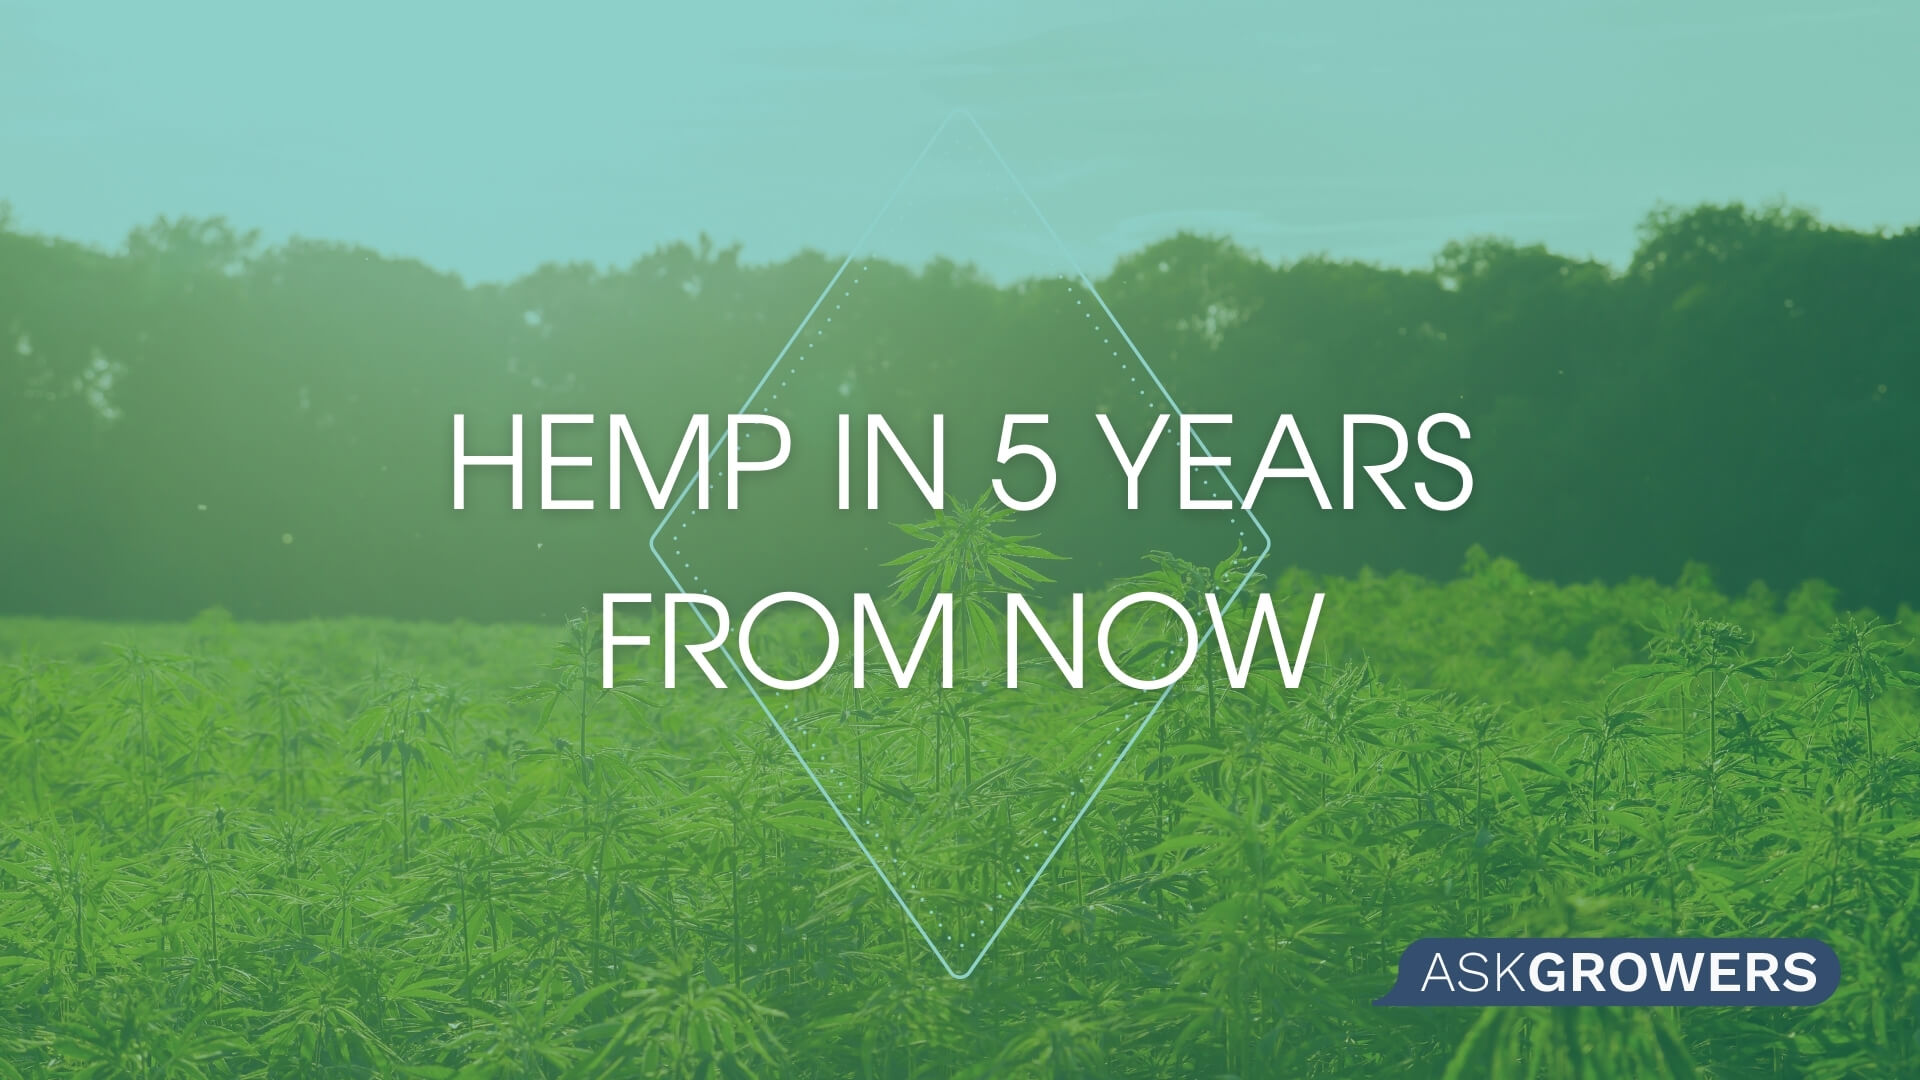 Hemp in 5 Years From Now